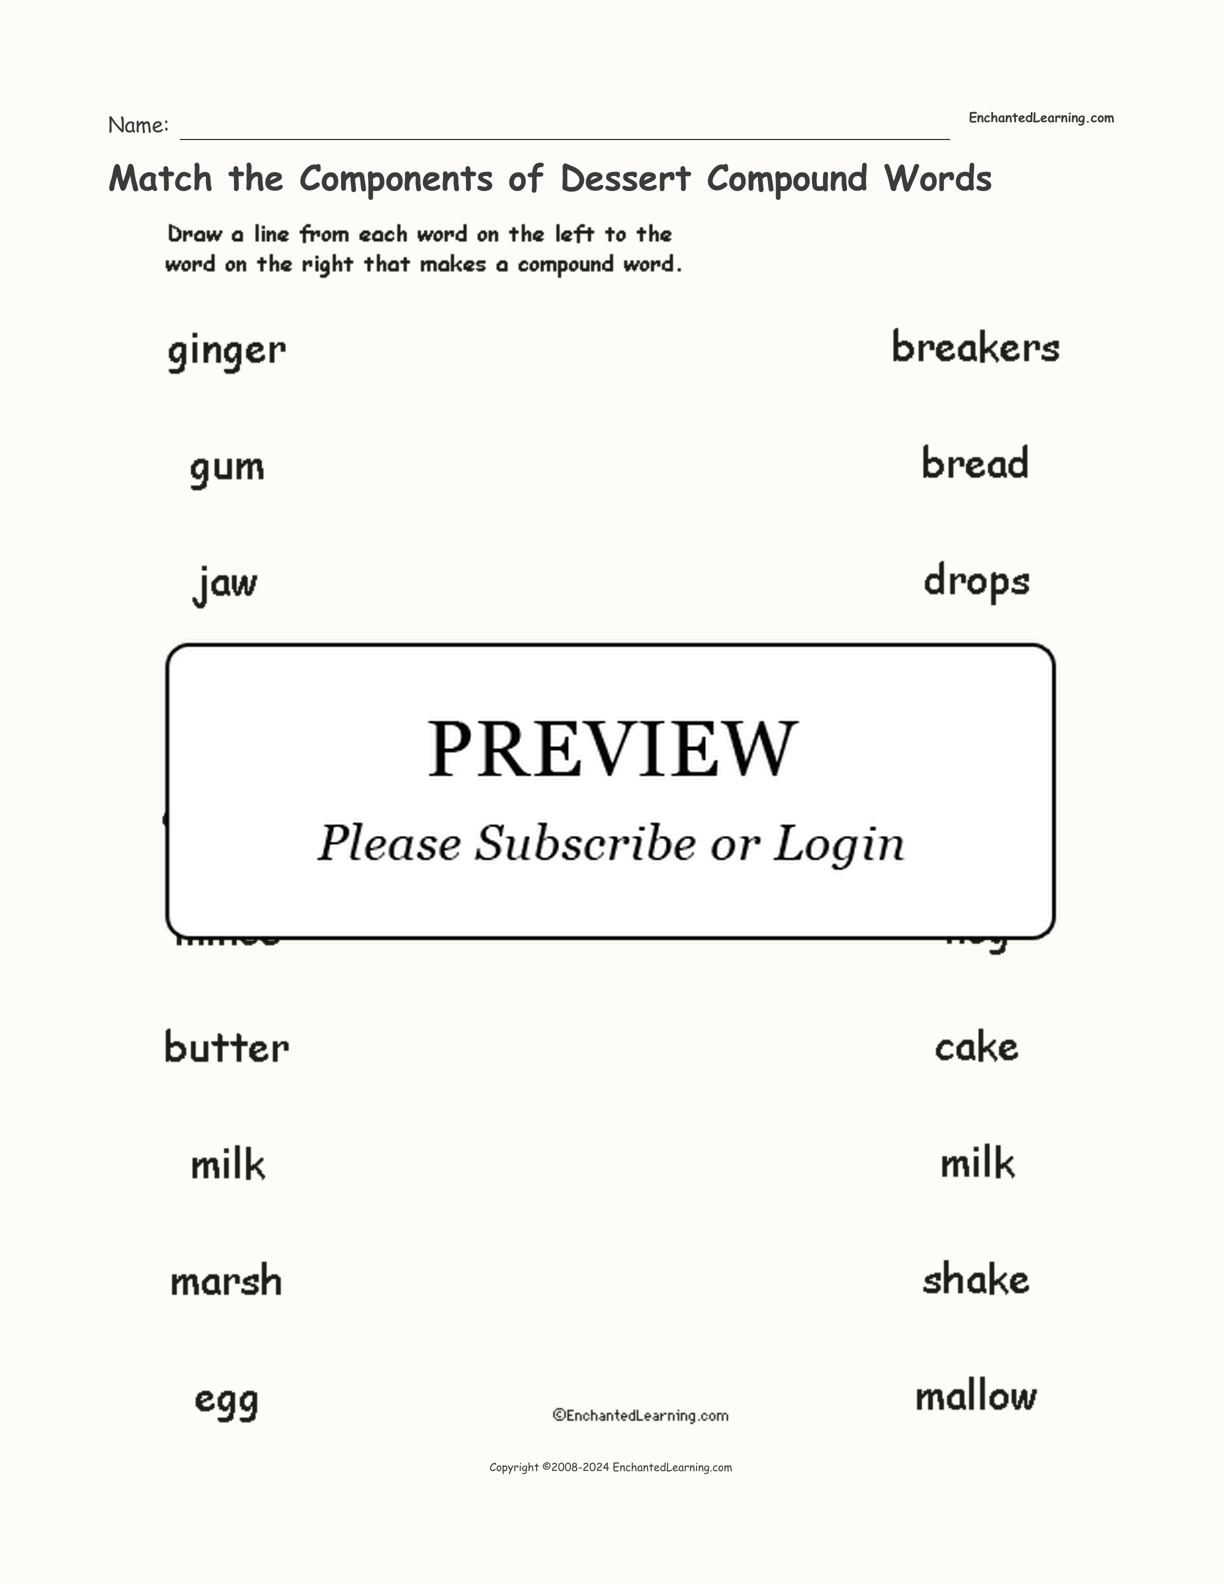 Match the Components of Dessert Compound Words interactive worksheet page 1